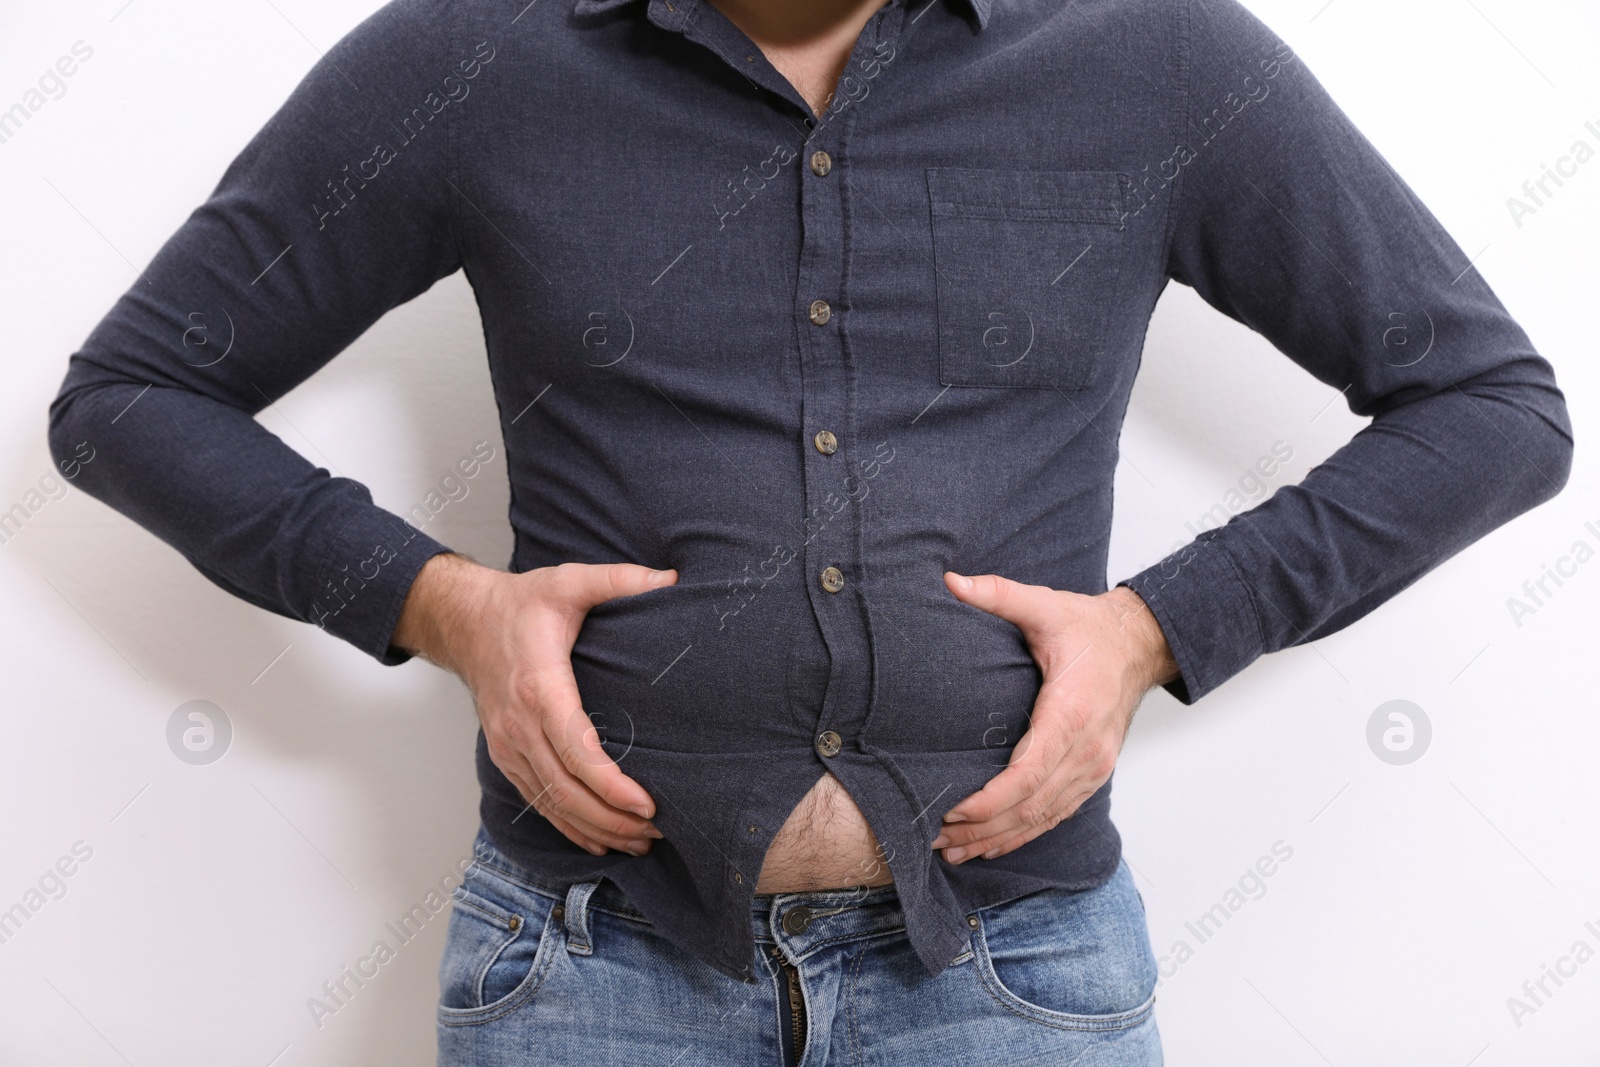 Photo of Man wearing tight shirt on white background, closeup. Overweight problem